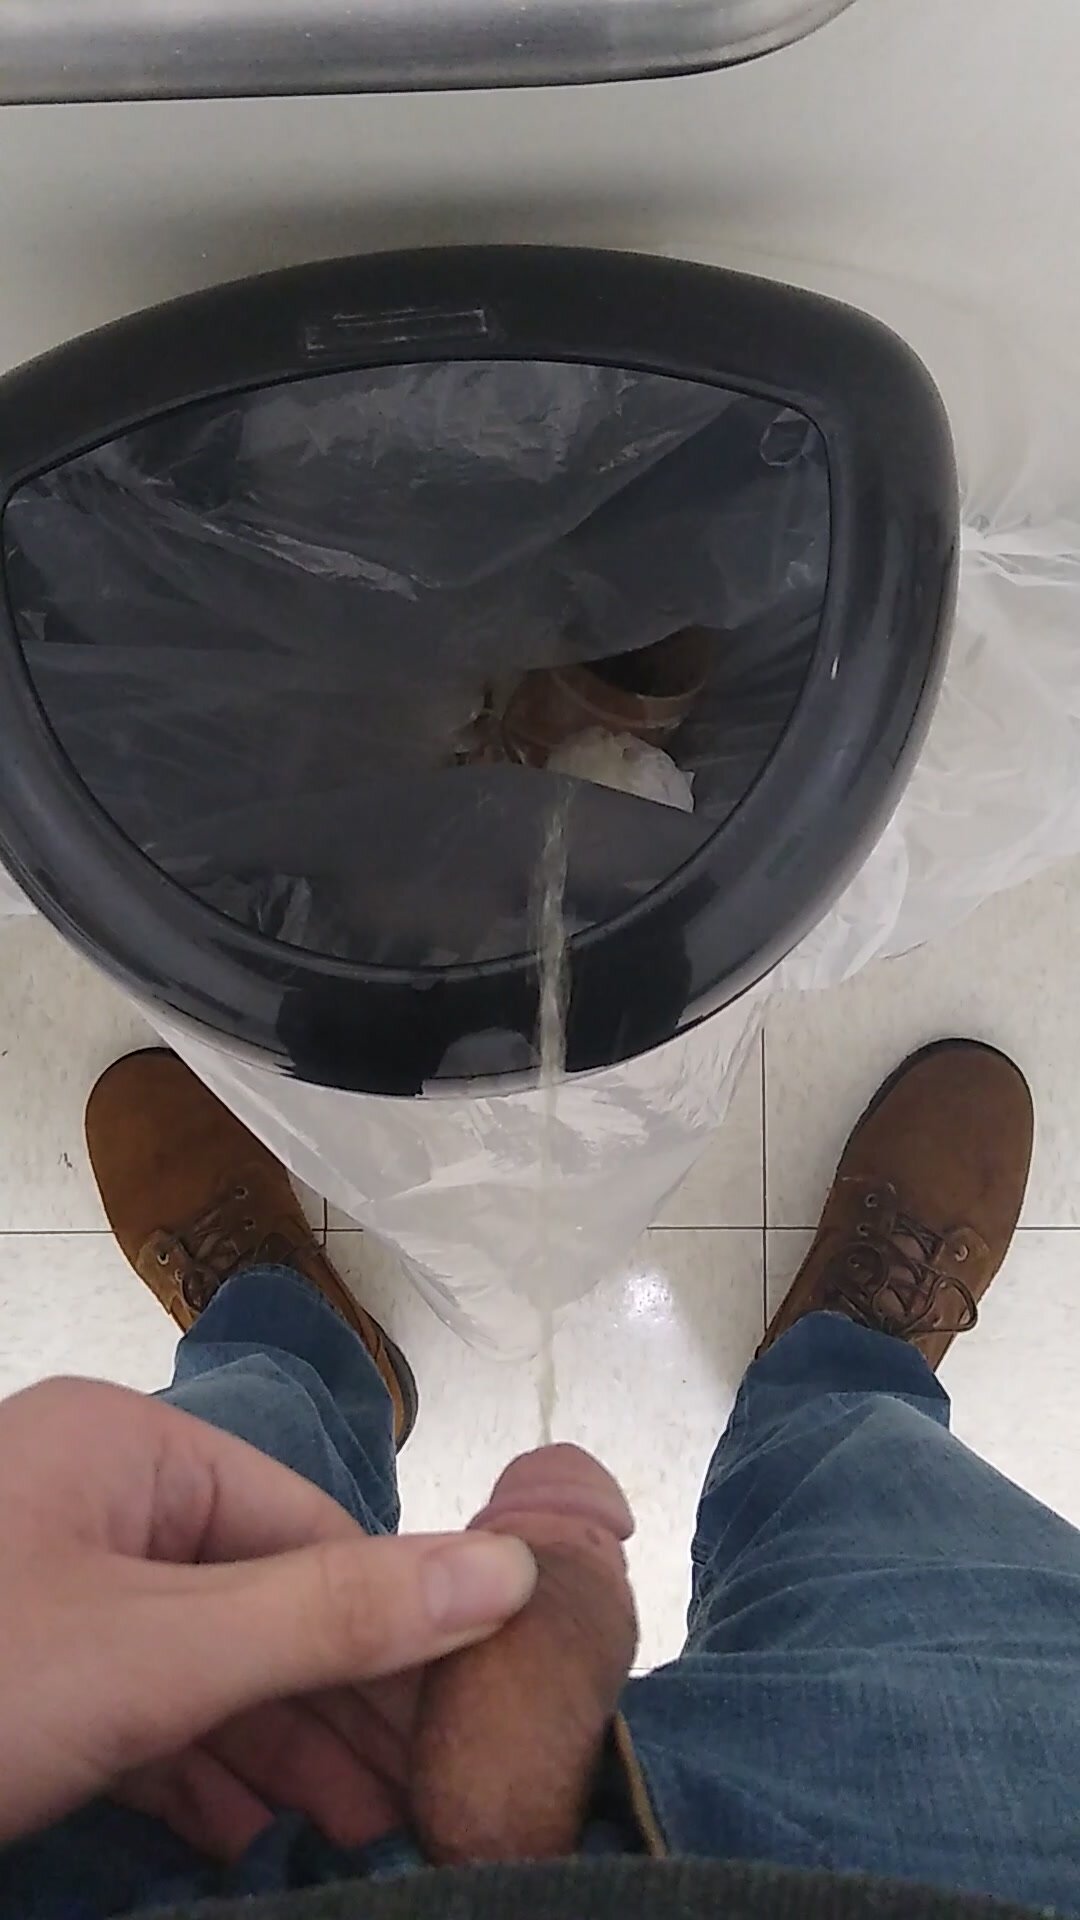 Piss in fabric store trash can